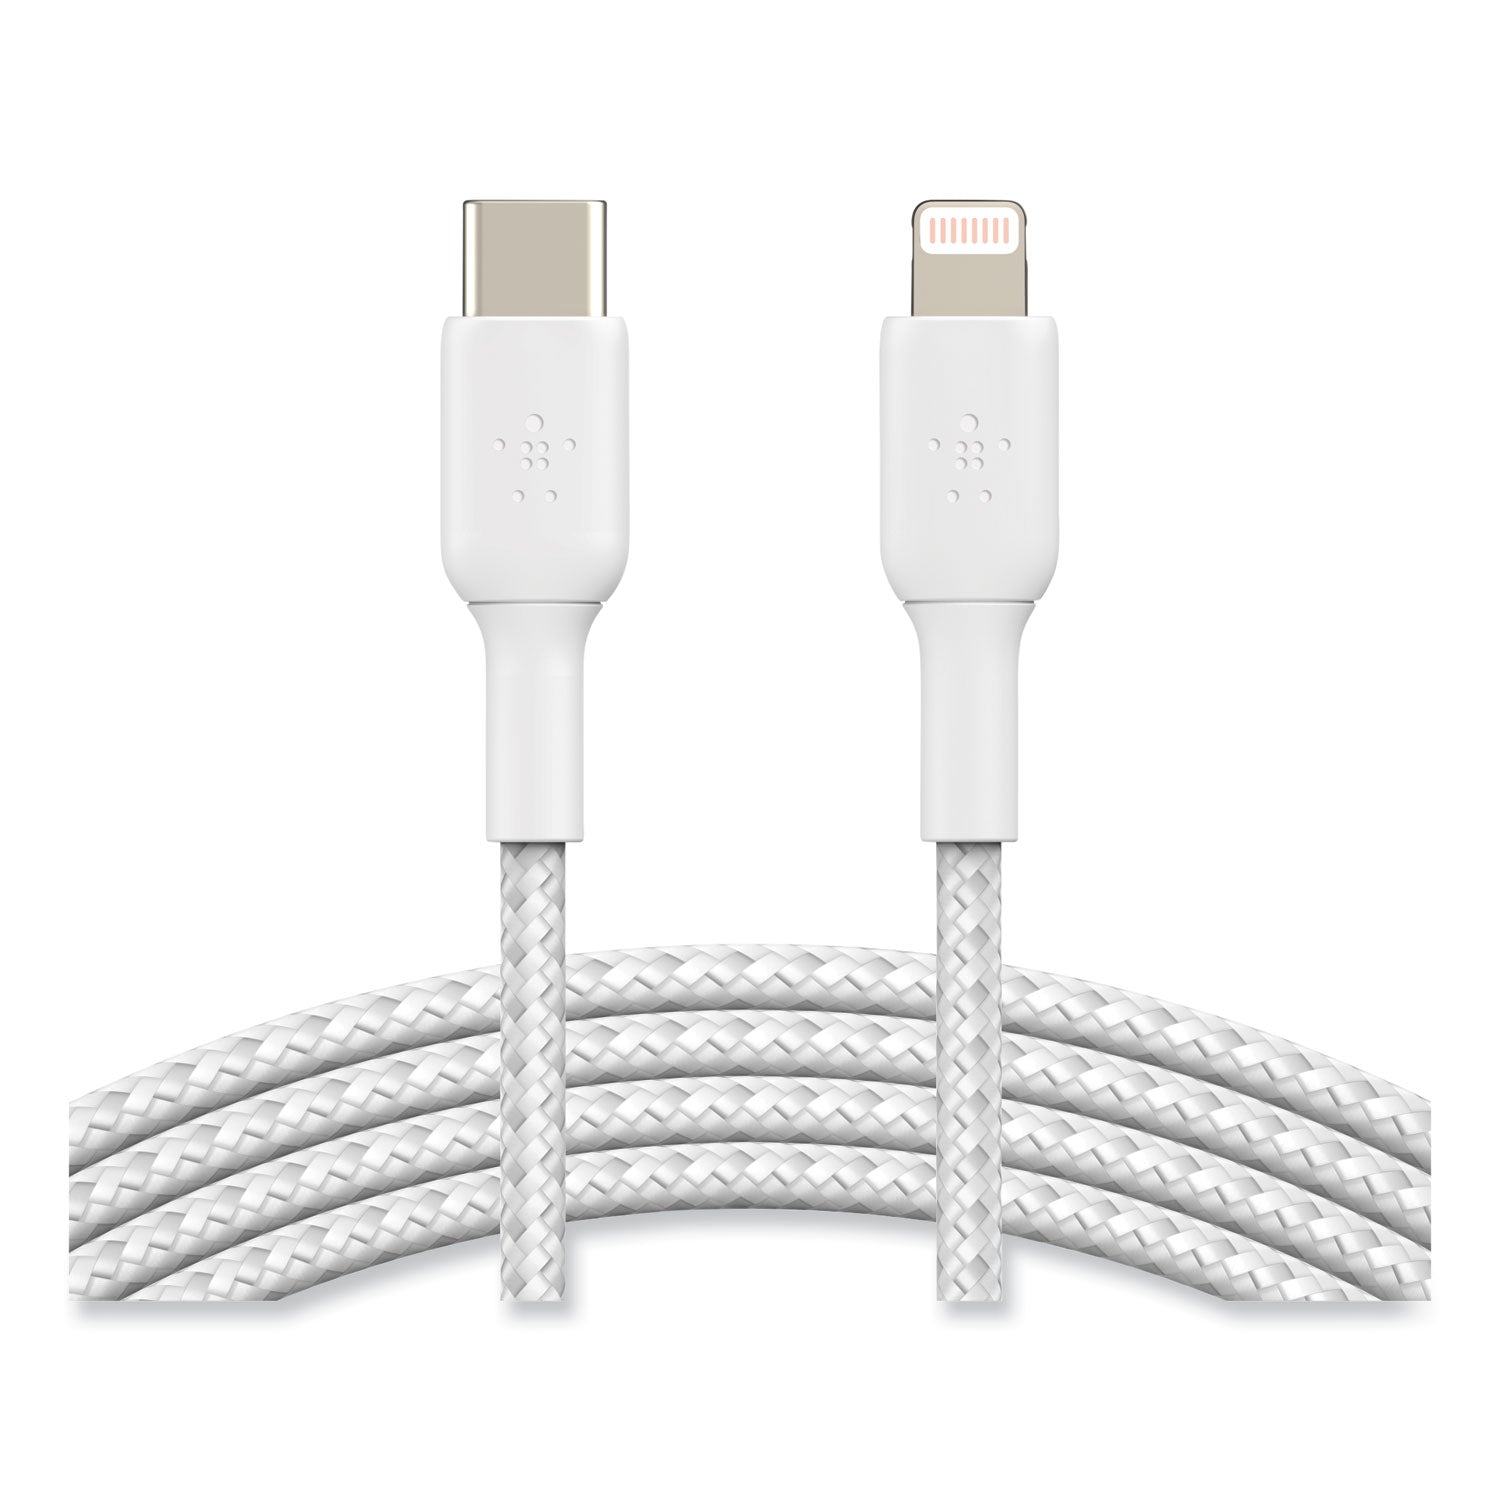 boost-charge-braided-apple-lightning-to-usb-c-chargesync-cable-33-ft-white_blkcaa004bt1mwh - 4